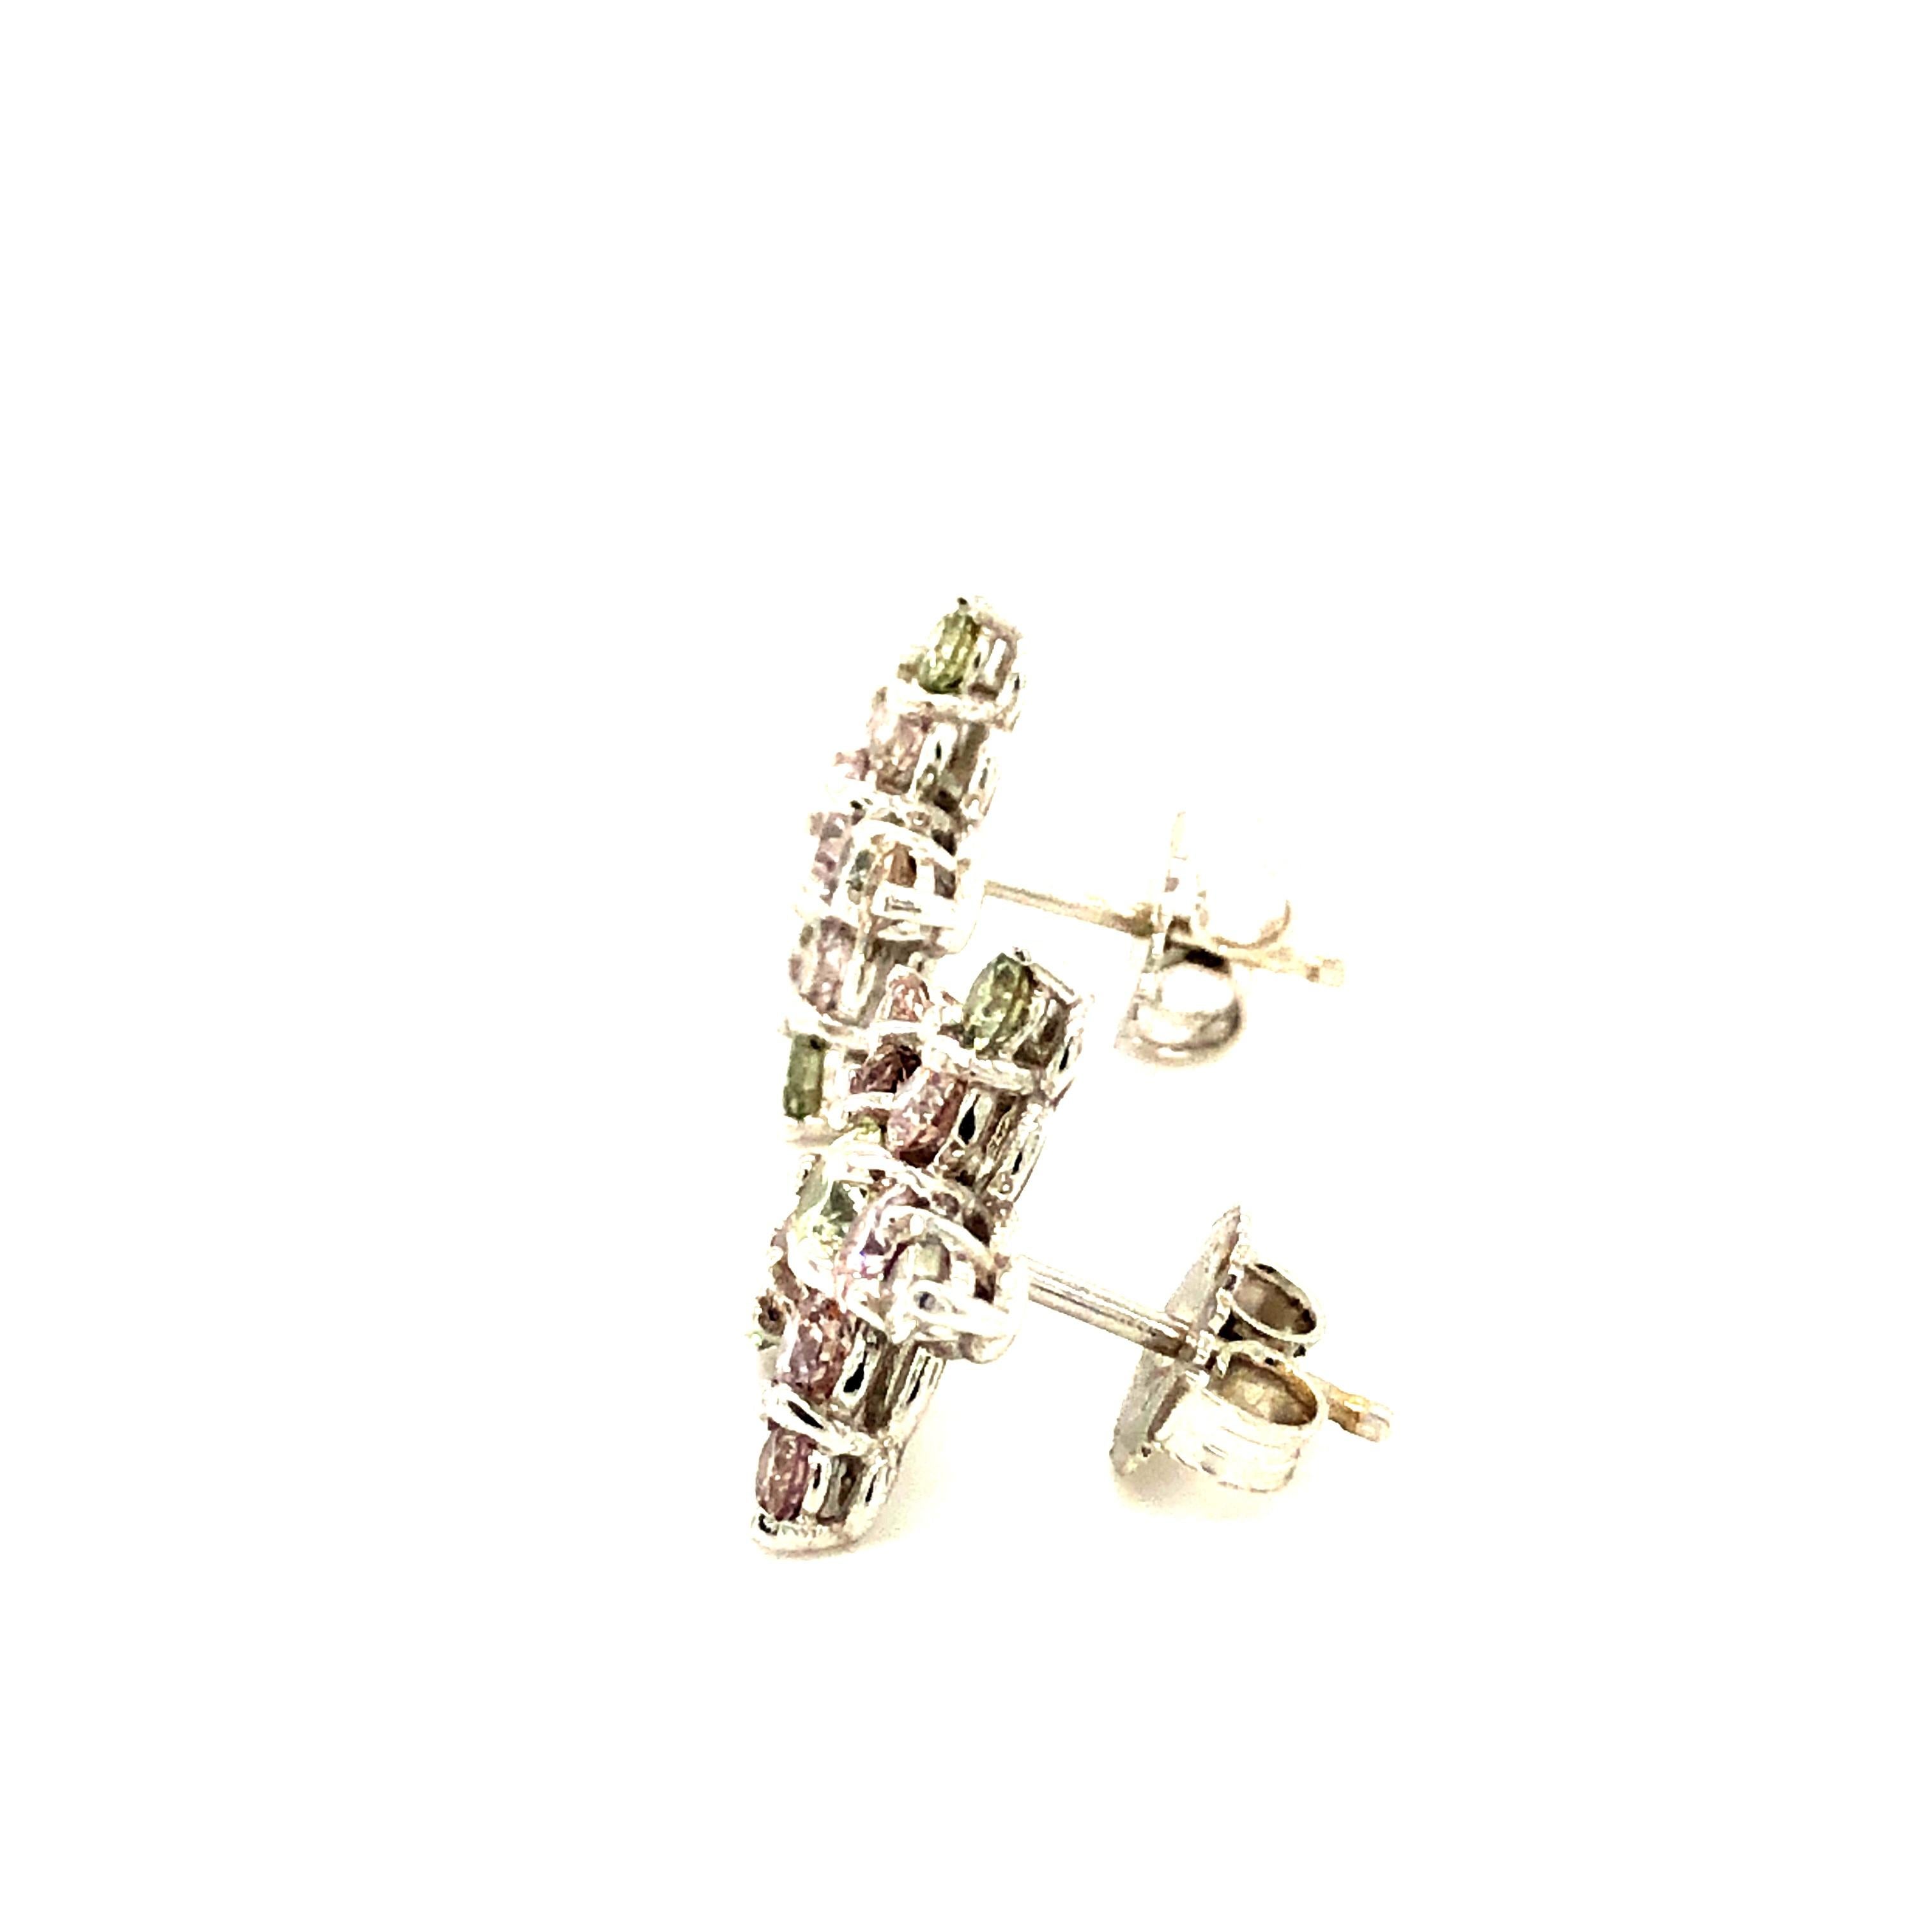 Women's or Men's Natural Pink, Green and White Diamonds Star Earrings, G.I.A Certified 18kt Gold